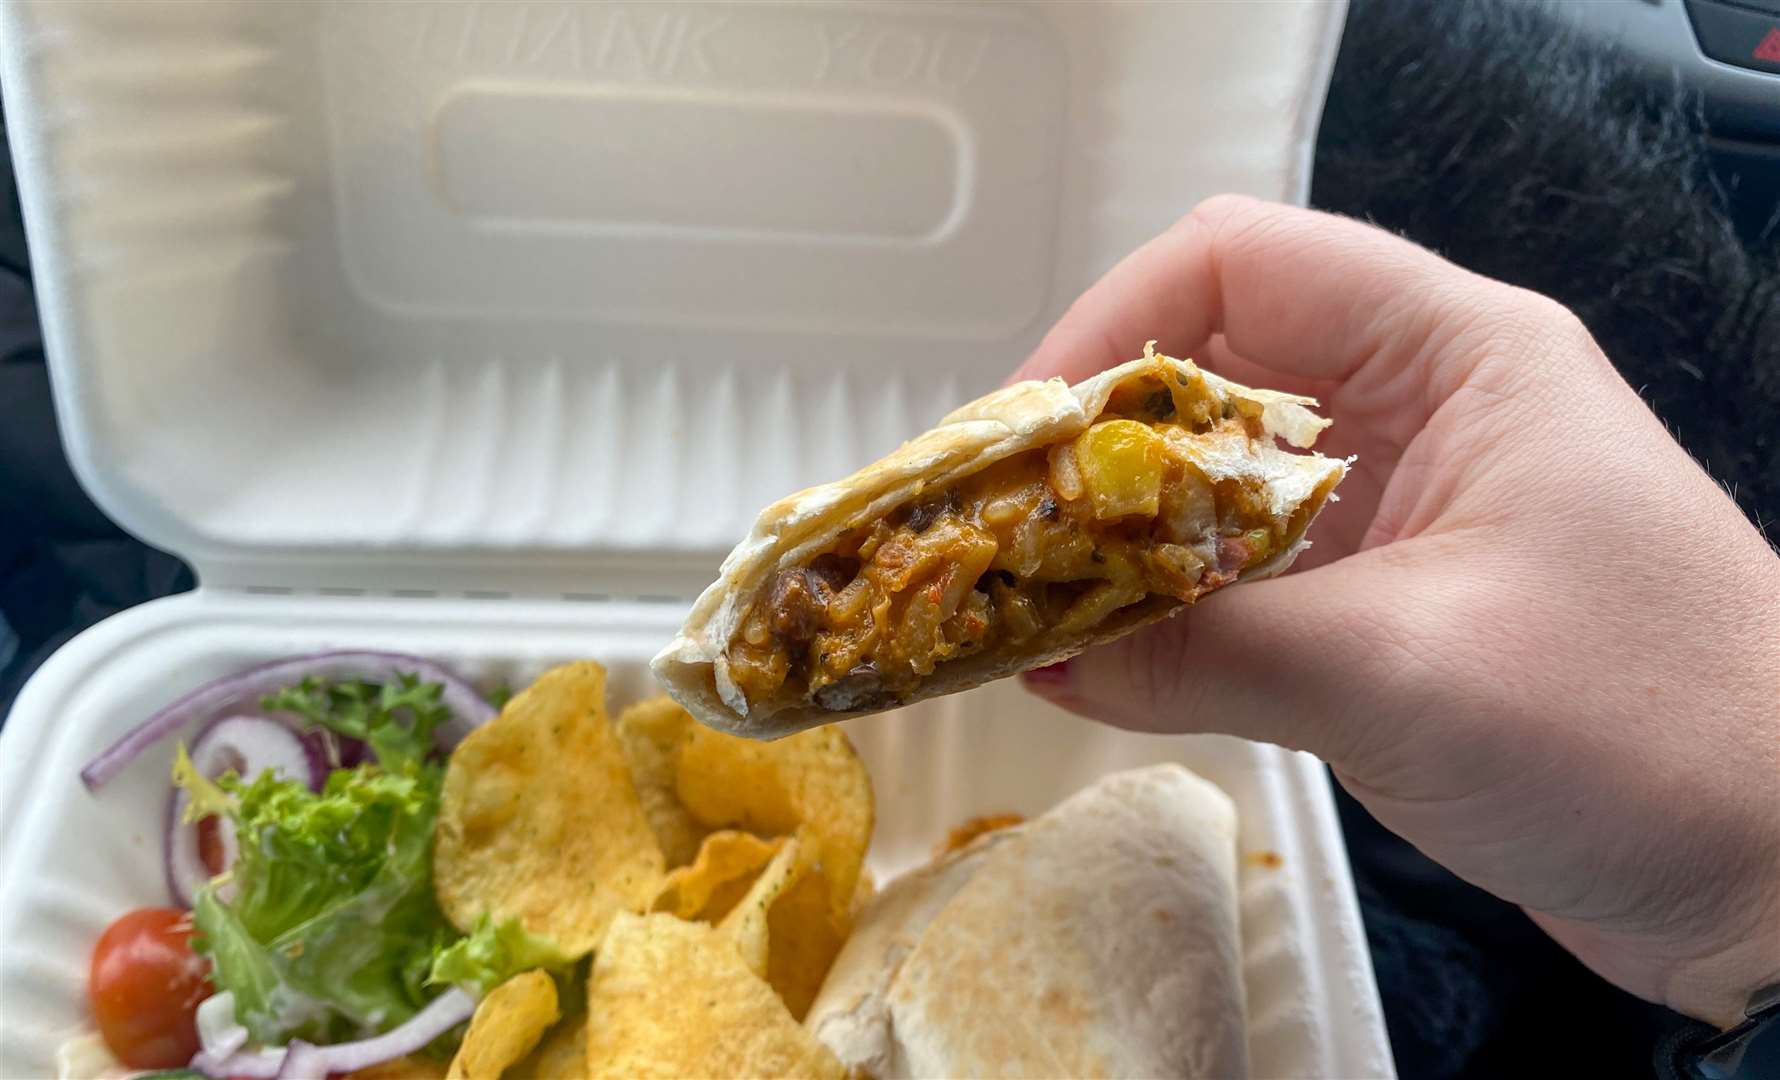 The burrito was filled with beans, vegetables, rice and beans and made for a hearty lunch option. Picture: Sam Lawrie